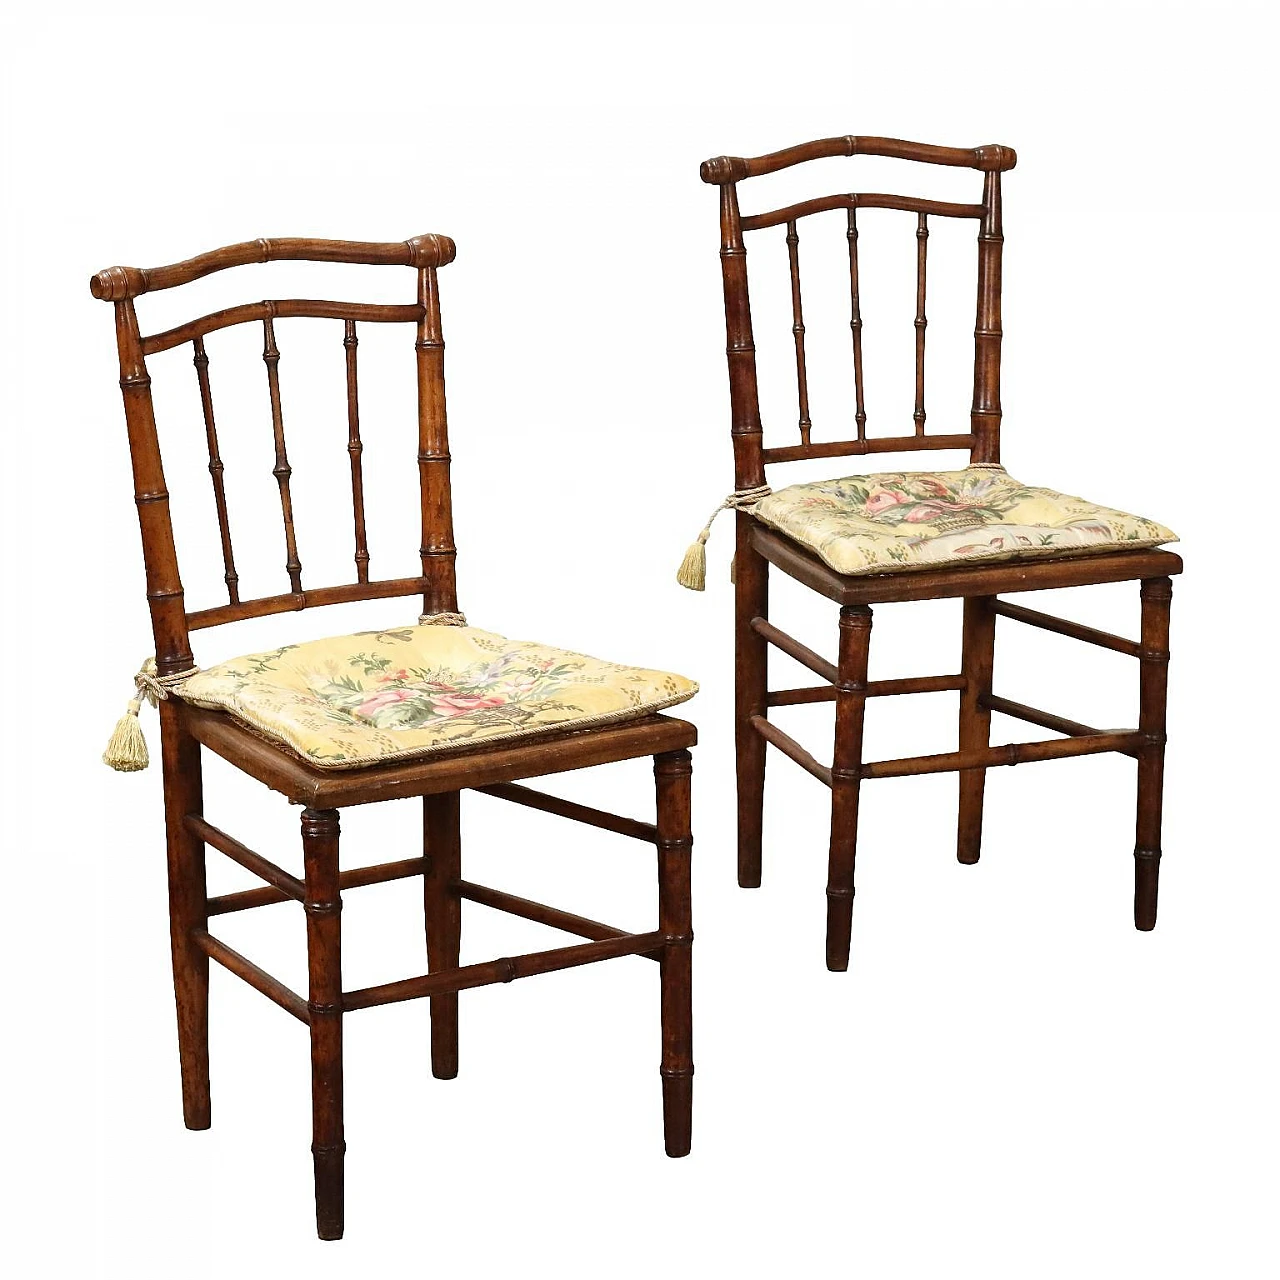 Pair of Chiavarine chairs in maple & cane seat, 19th century 1